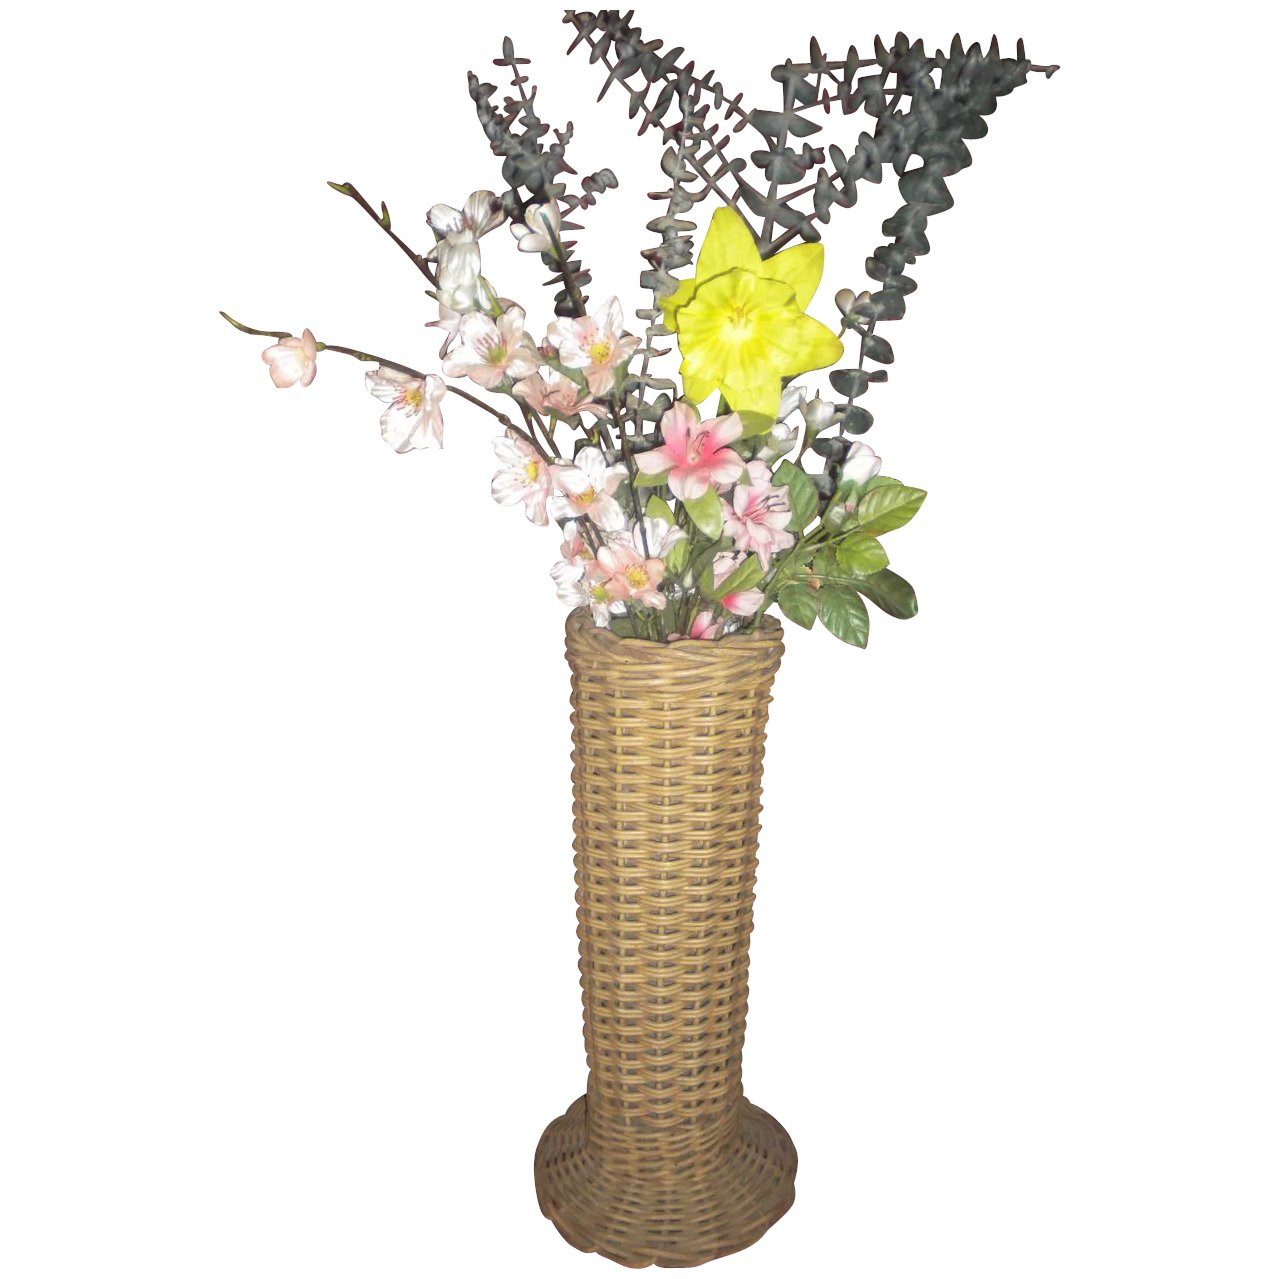 28 Recommended Tall Flower Vases 2024 free download tall flower vases of vases wicker flower vase 80cm coarse rattan french woven pattern with regard to antique wicker tall vase original metal full 1 2048 10 10 96 f random 2 wicker